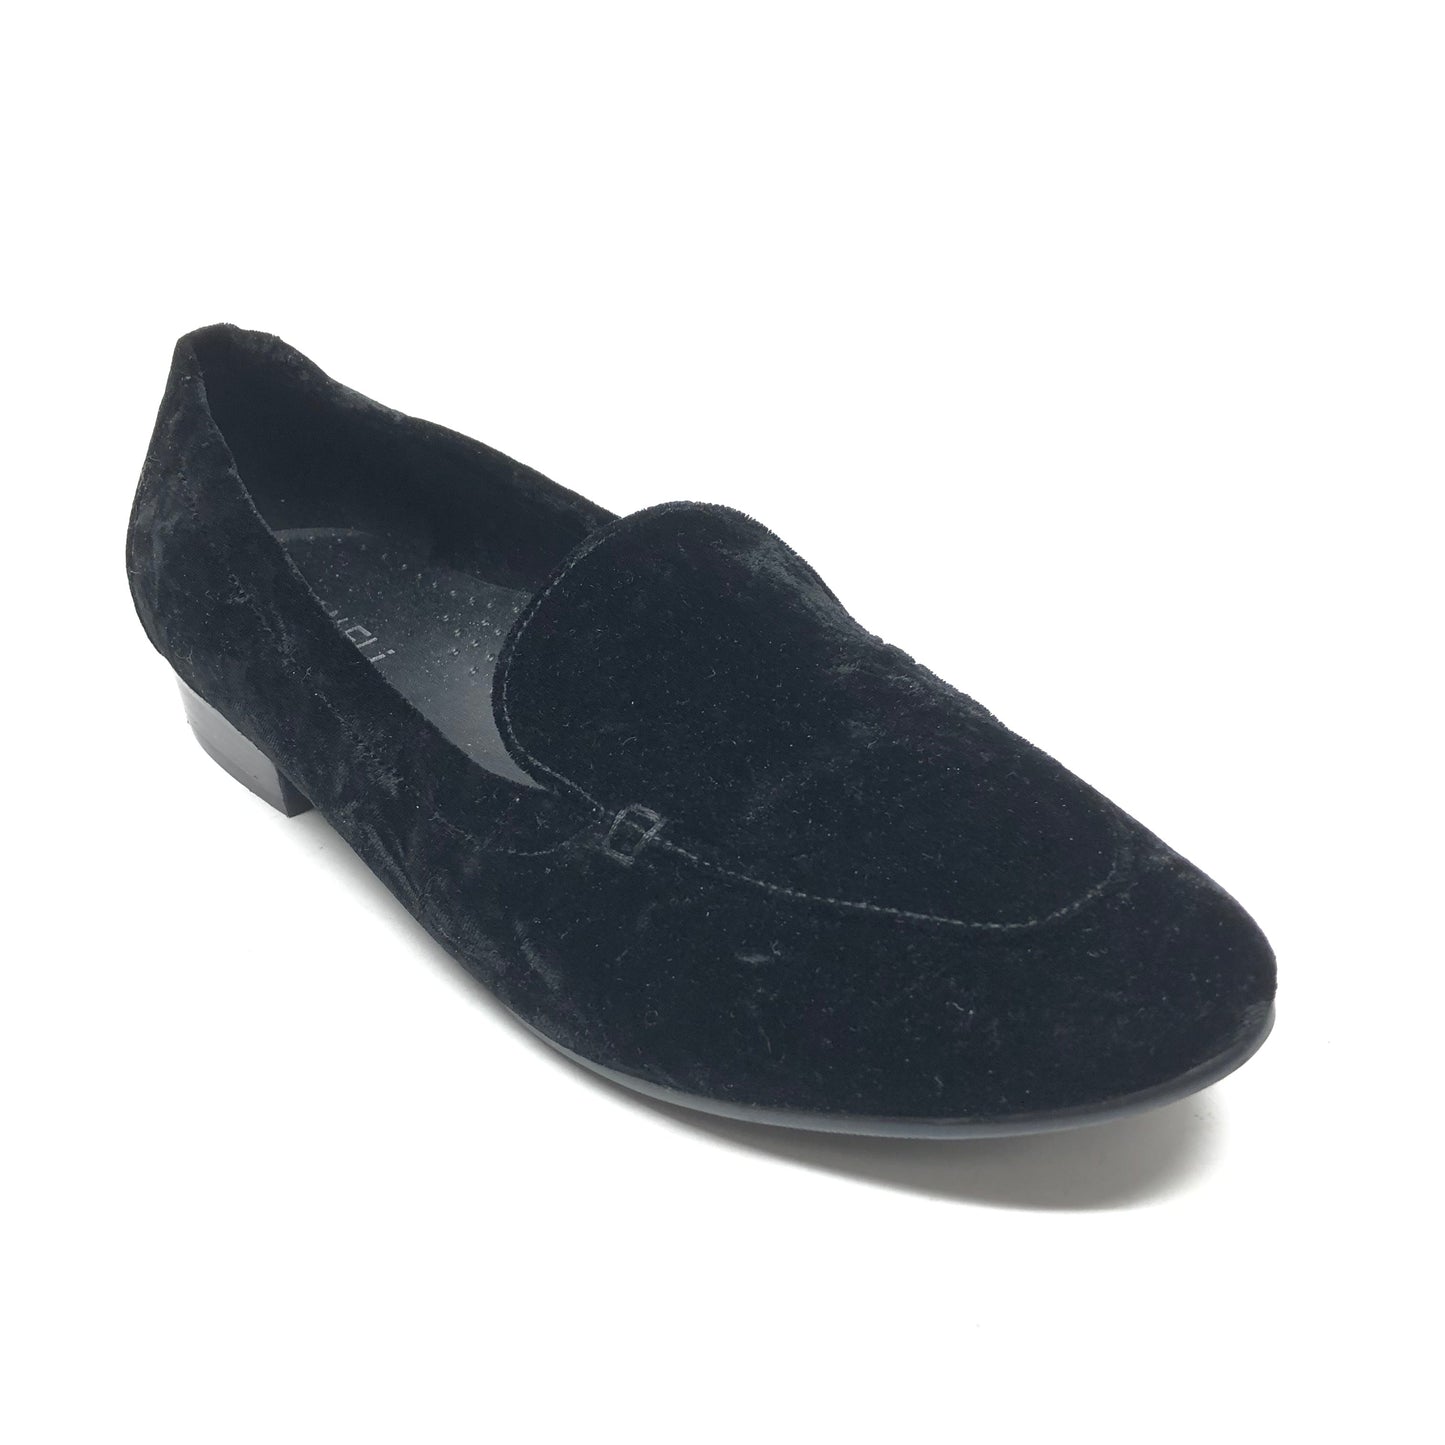 Shoes Flats Loafer Oxford By Vaneli  Size: 9.5